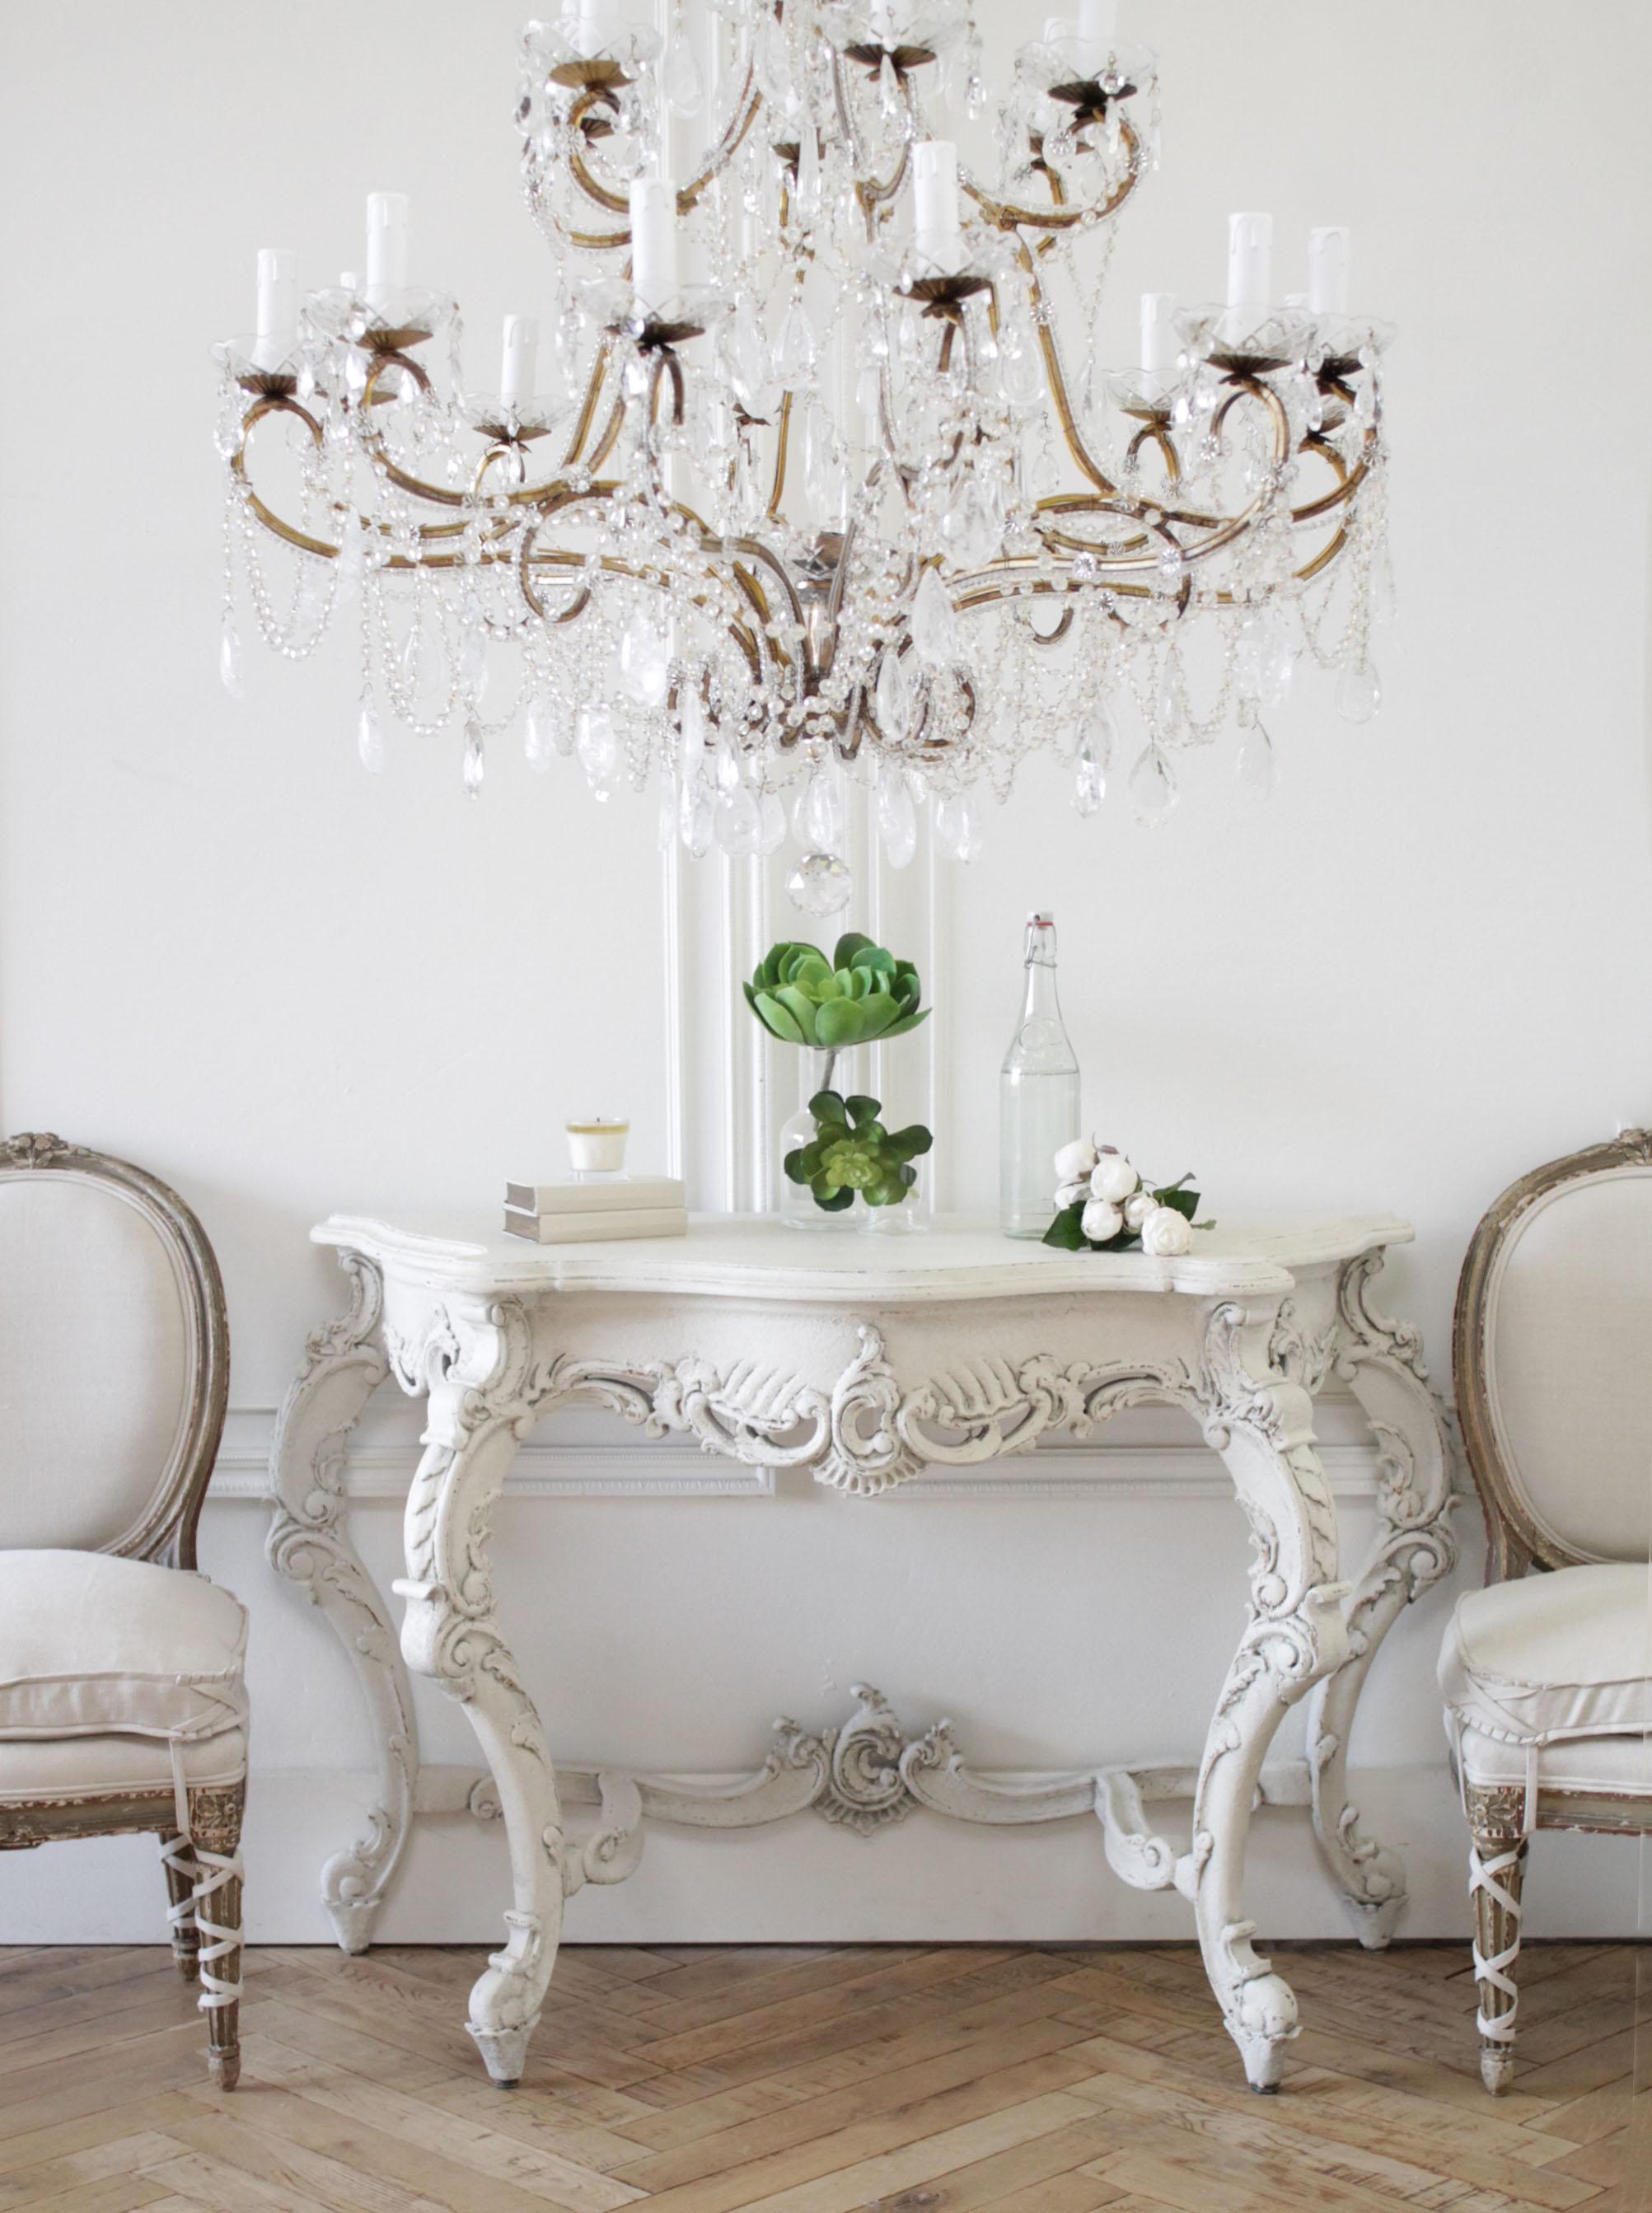 Antique painted French style console table
Beautiful antique painted finish in oyster white with subtle distressed edges, and antique patina.
Solid and sturdy can stand alone, does not need to be mounted to a wall.
        